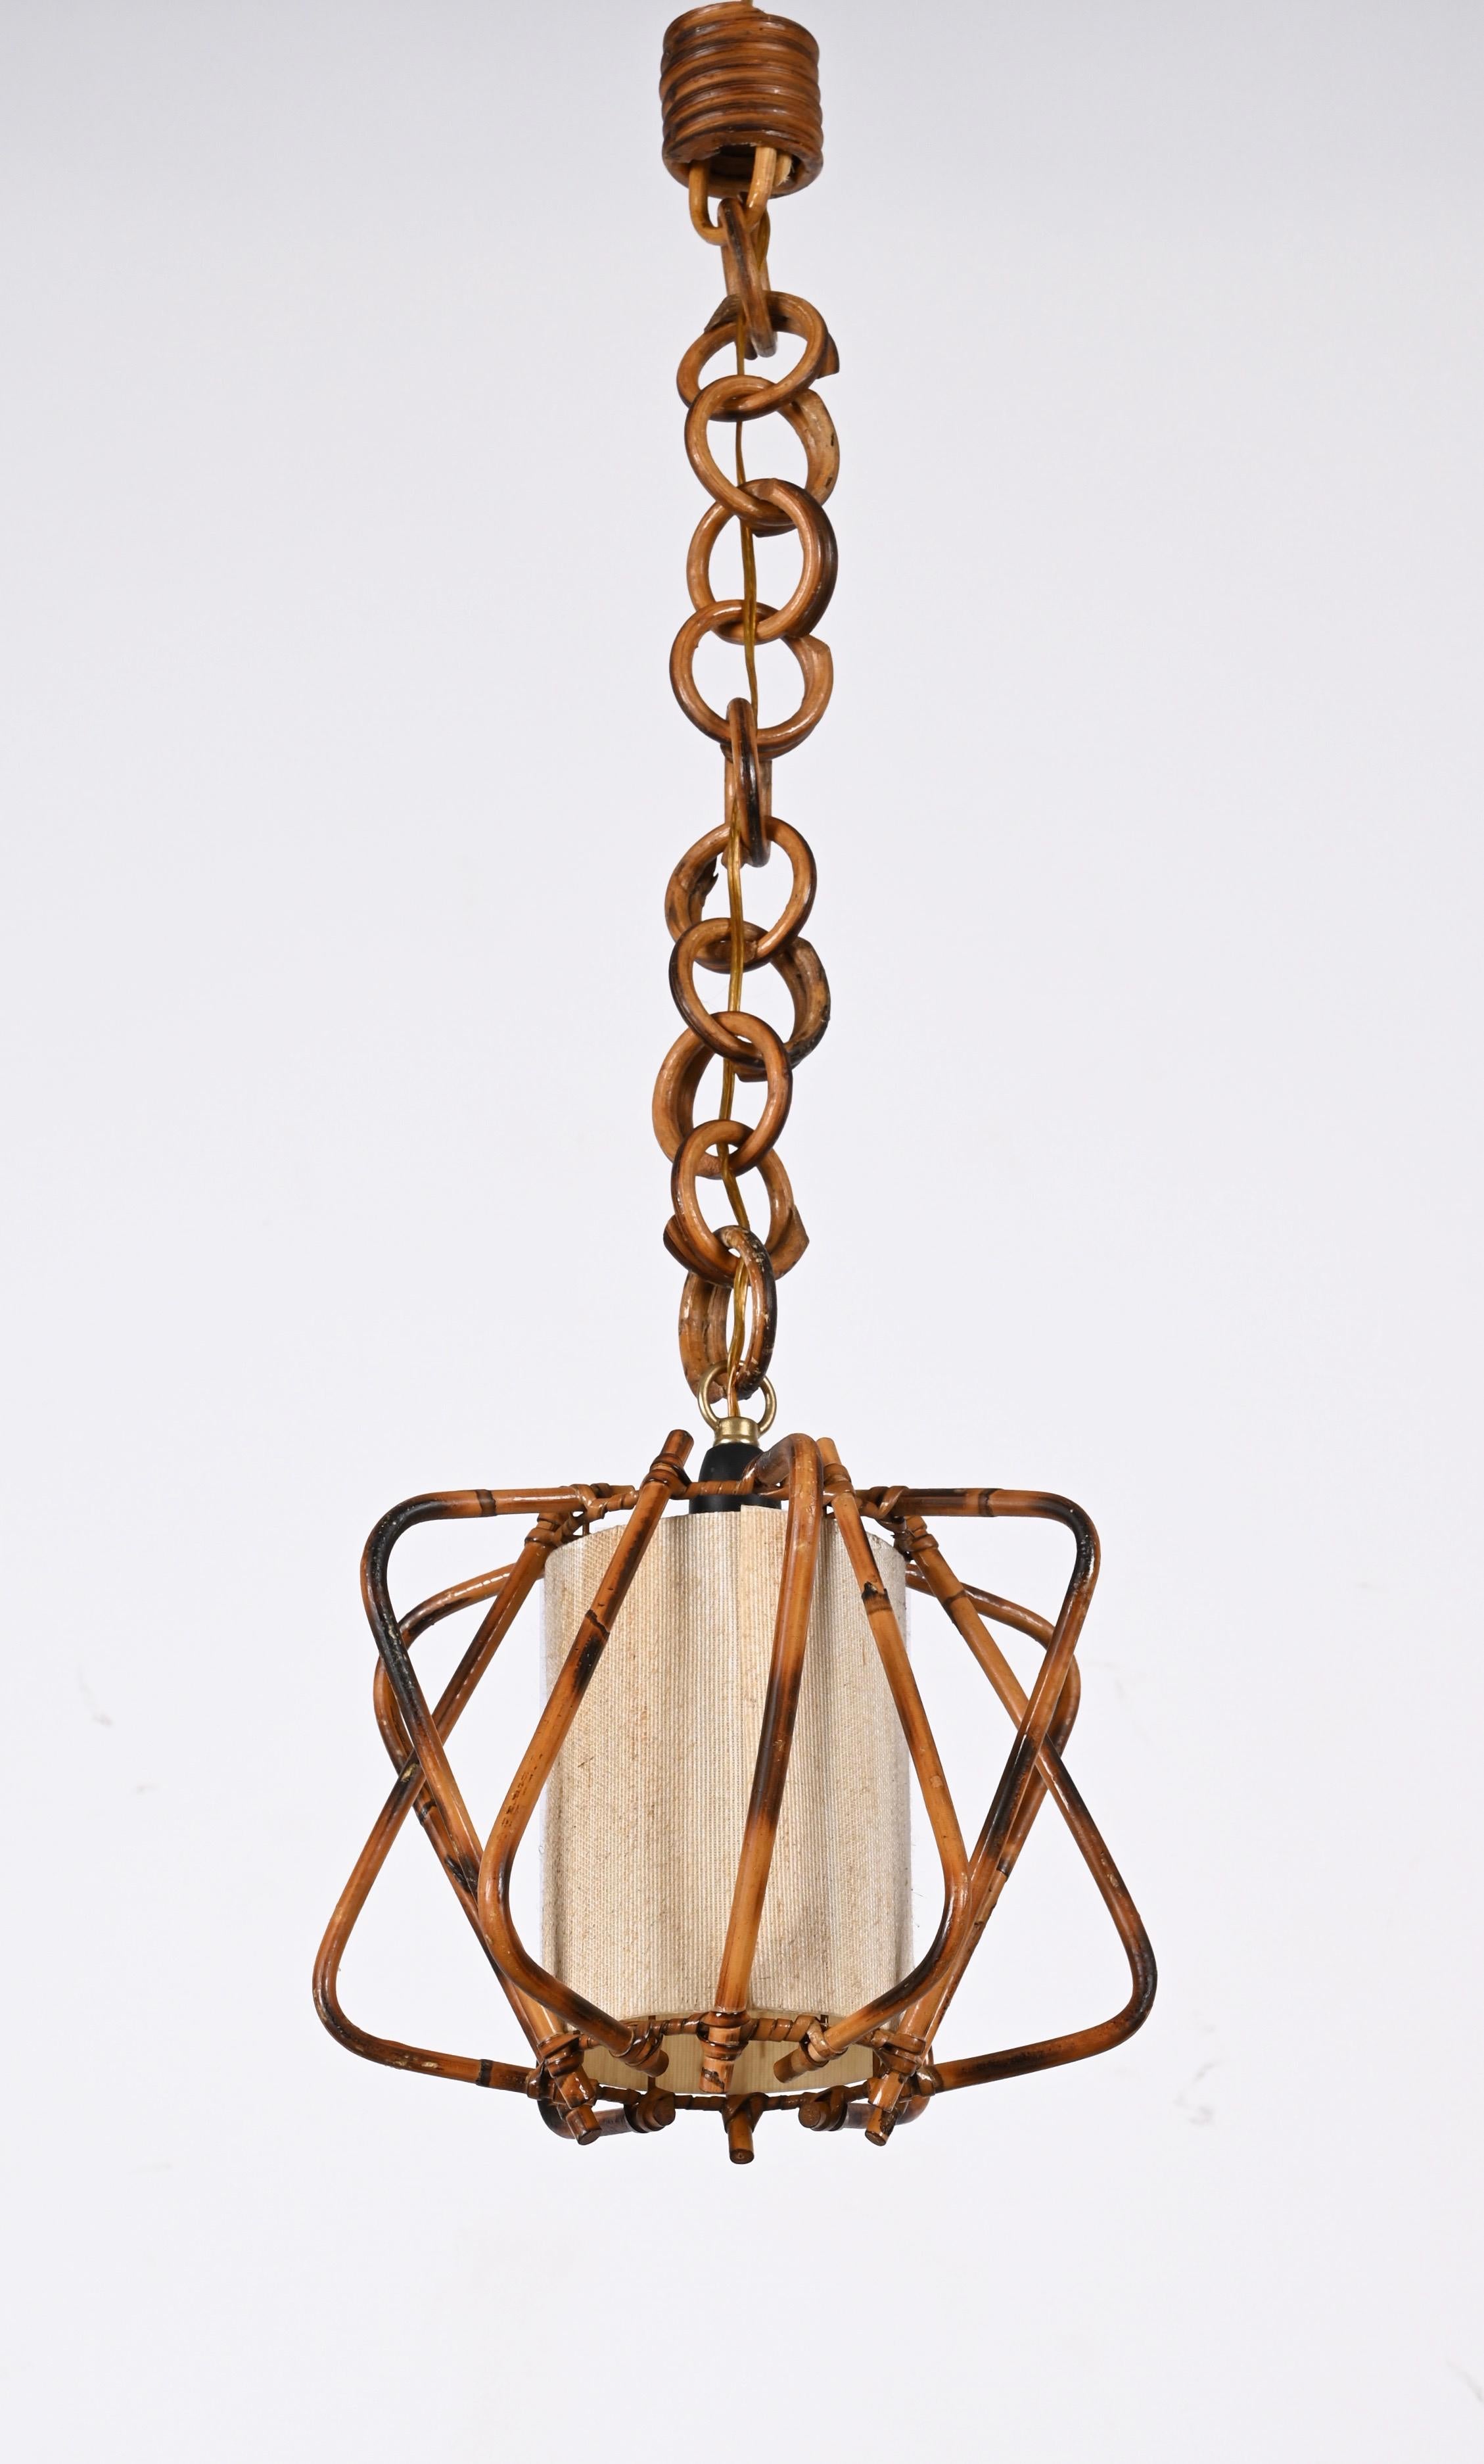 Midcentury Bamboo, Cane and Rattan French Chandelier After Louis Sognot, 1960s For Sale 12